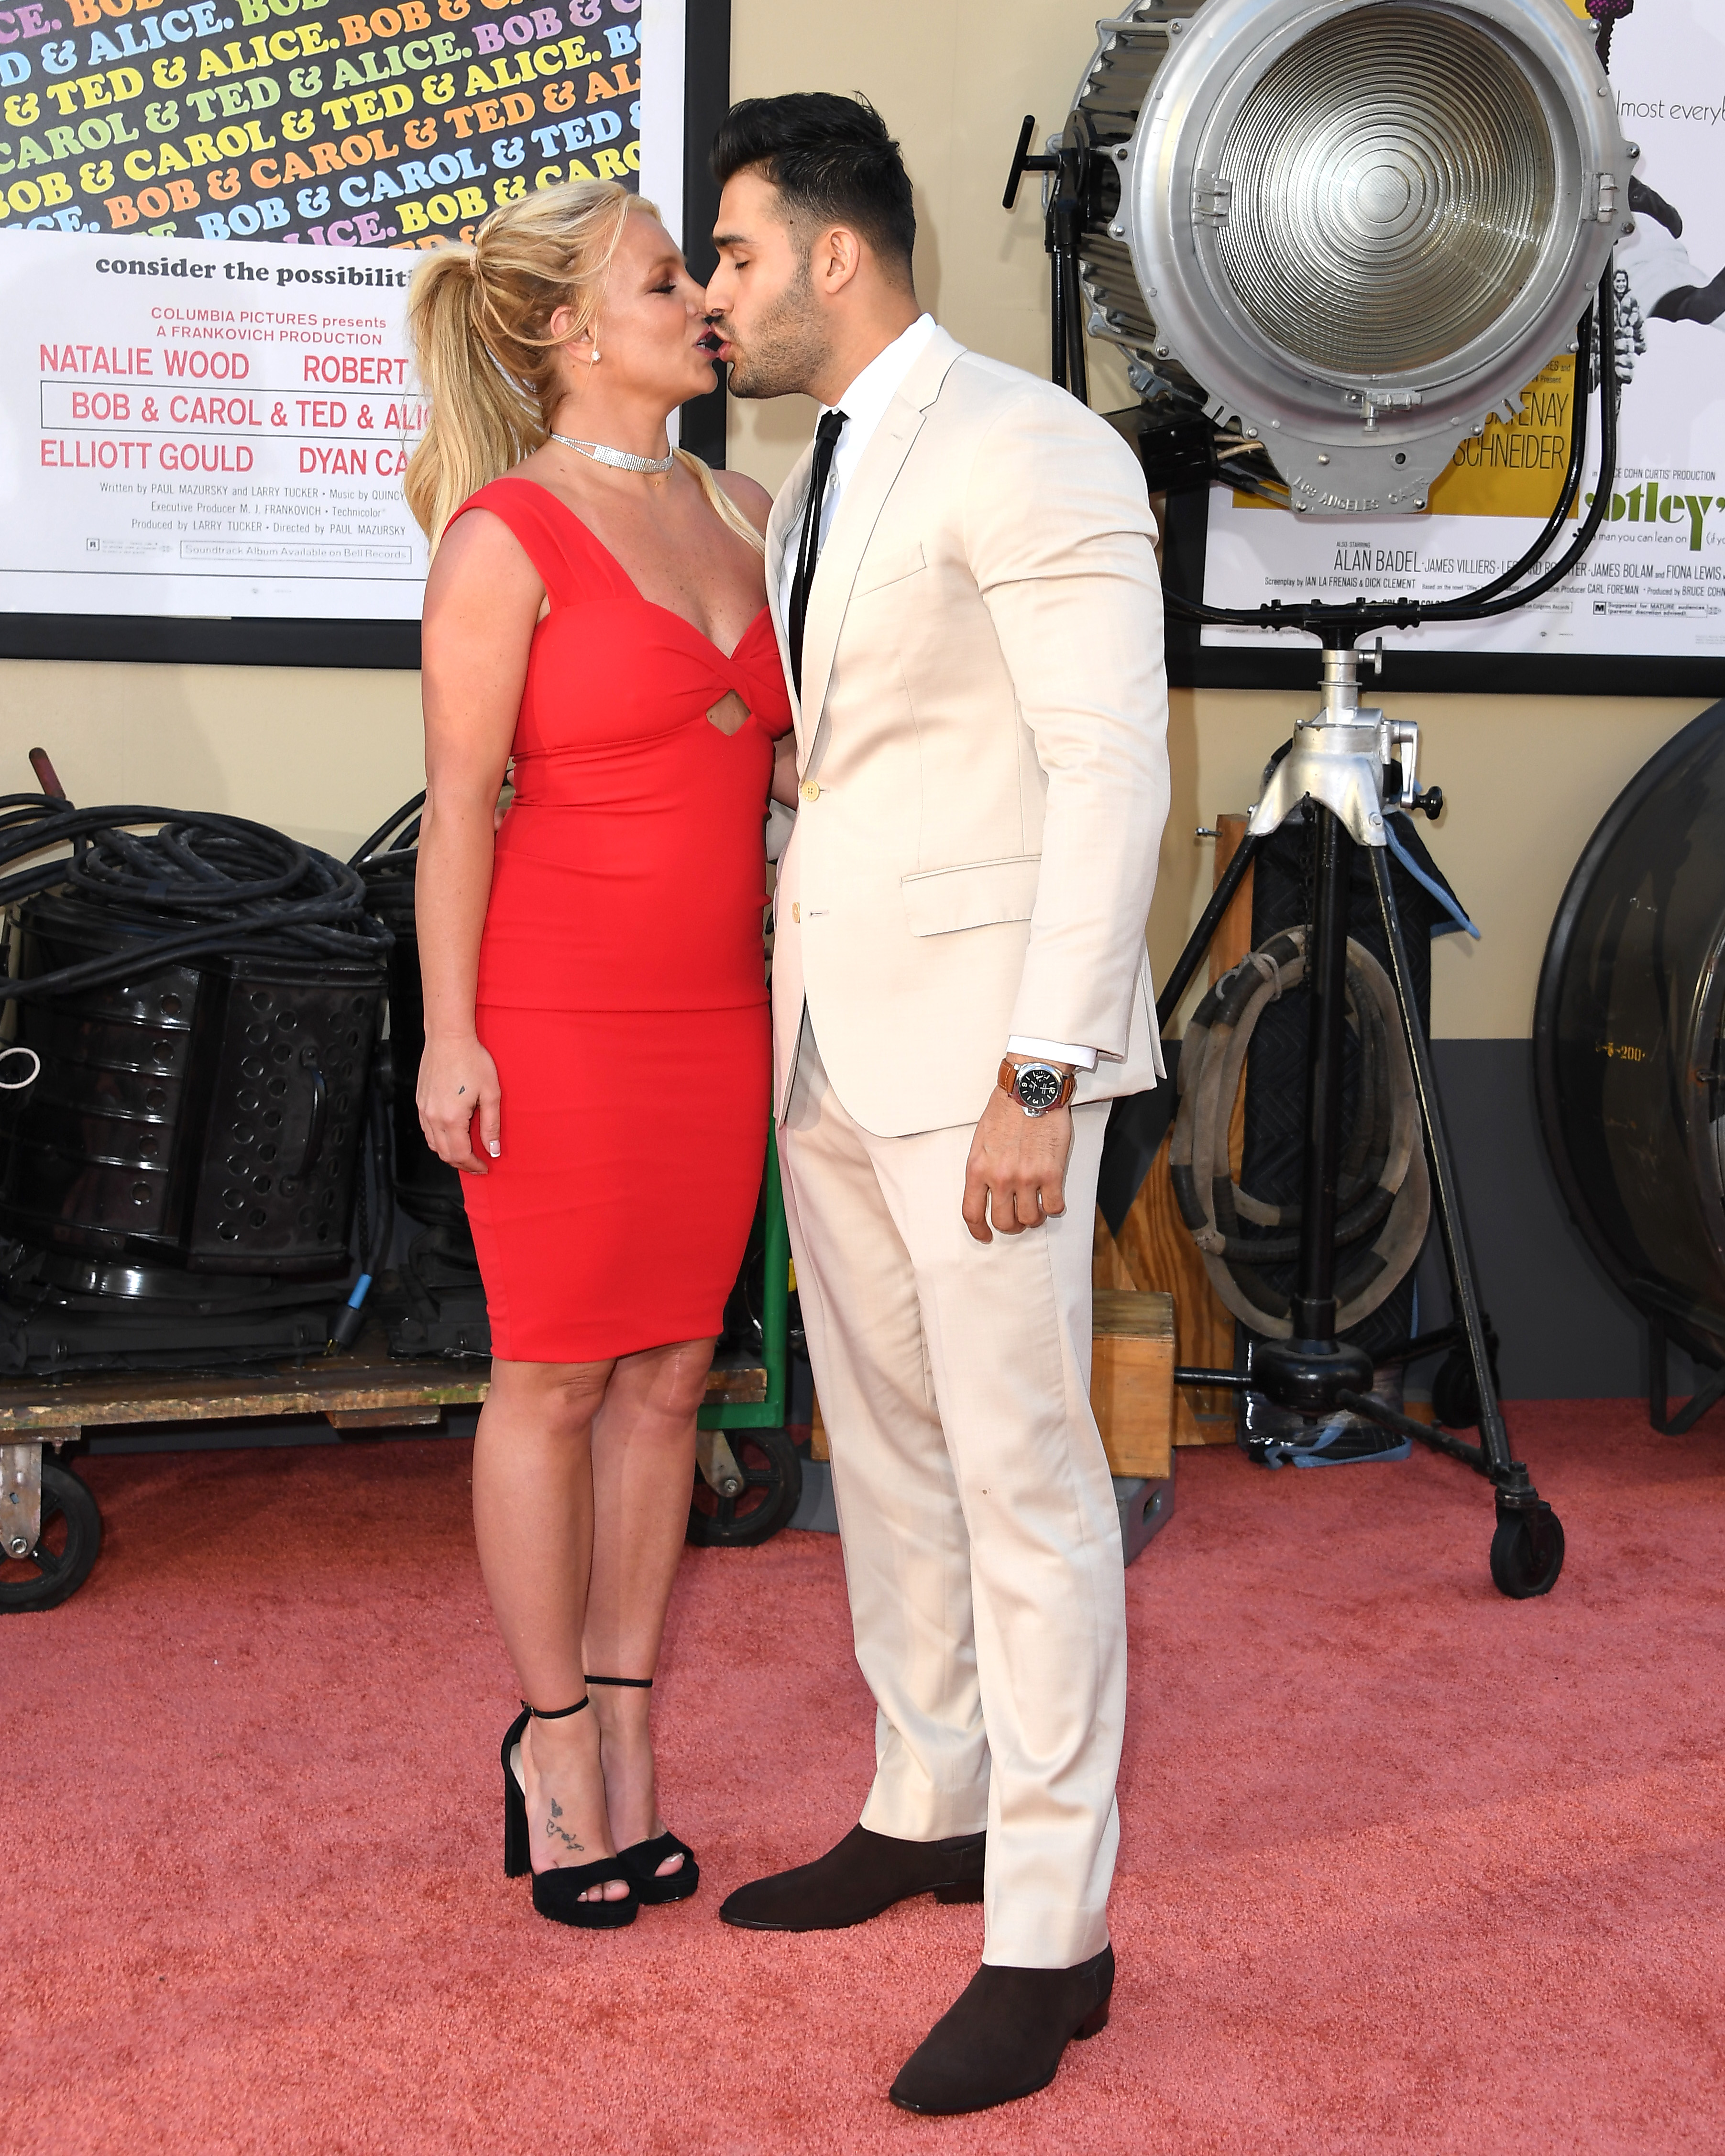 Britney Spears and Sam Asghari in Hollywood, California on July 22, 2019 | Source: Getty Images